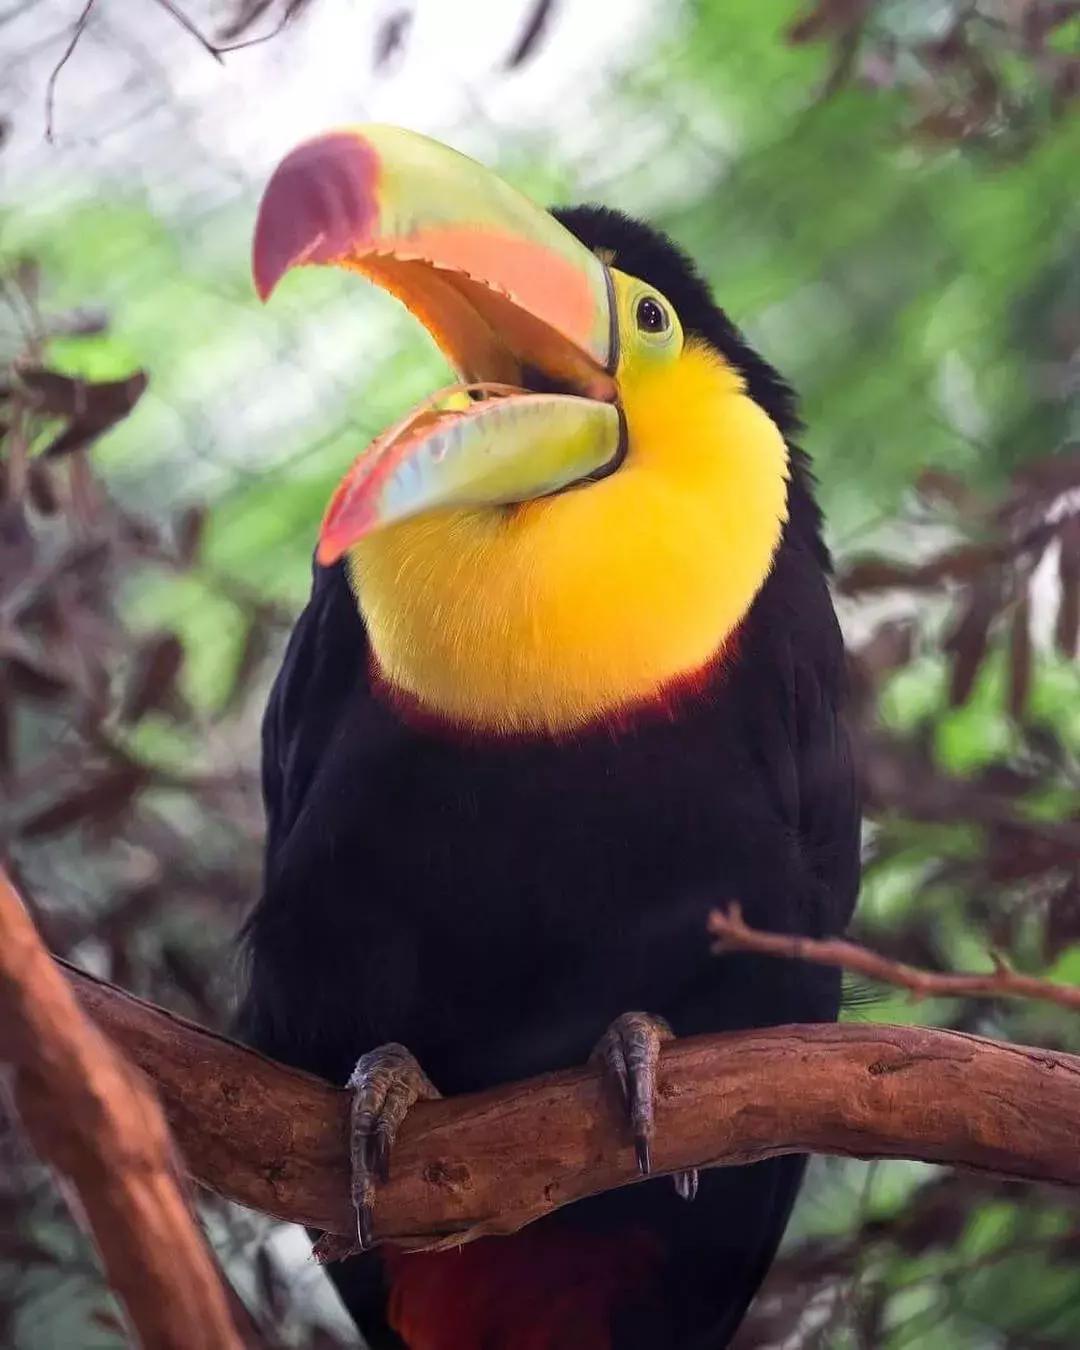 A toucan at the 贝博体彩app动物园.